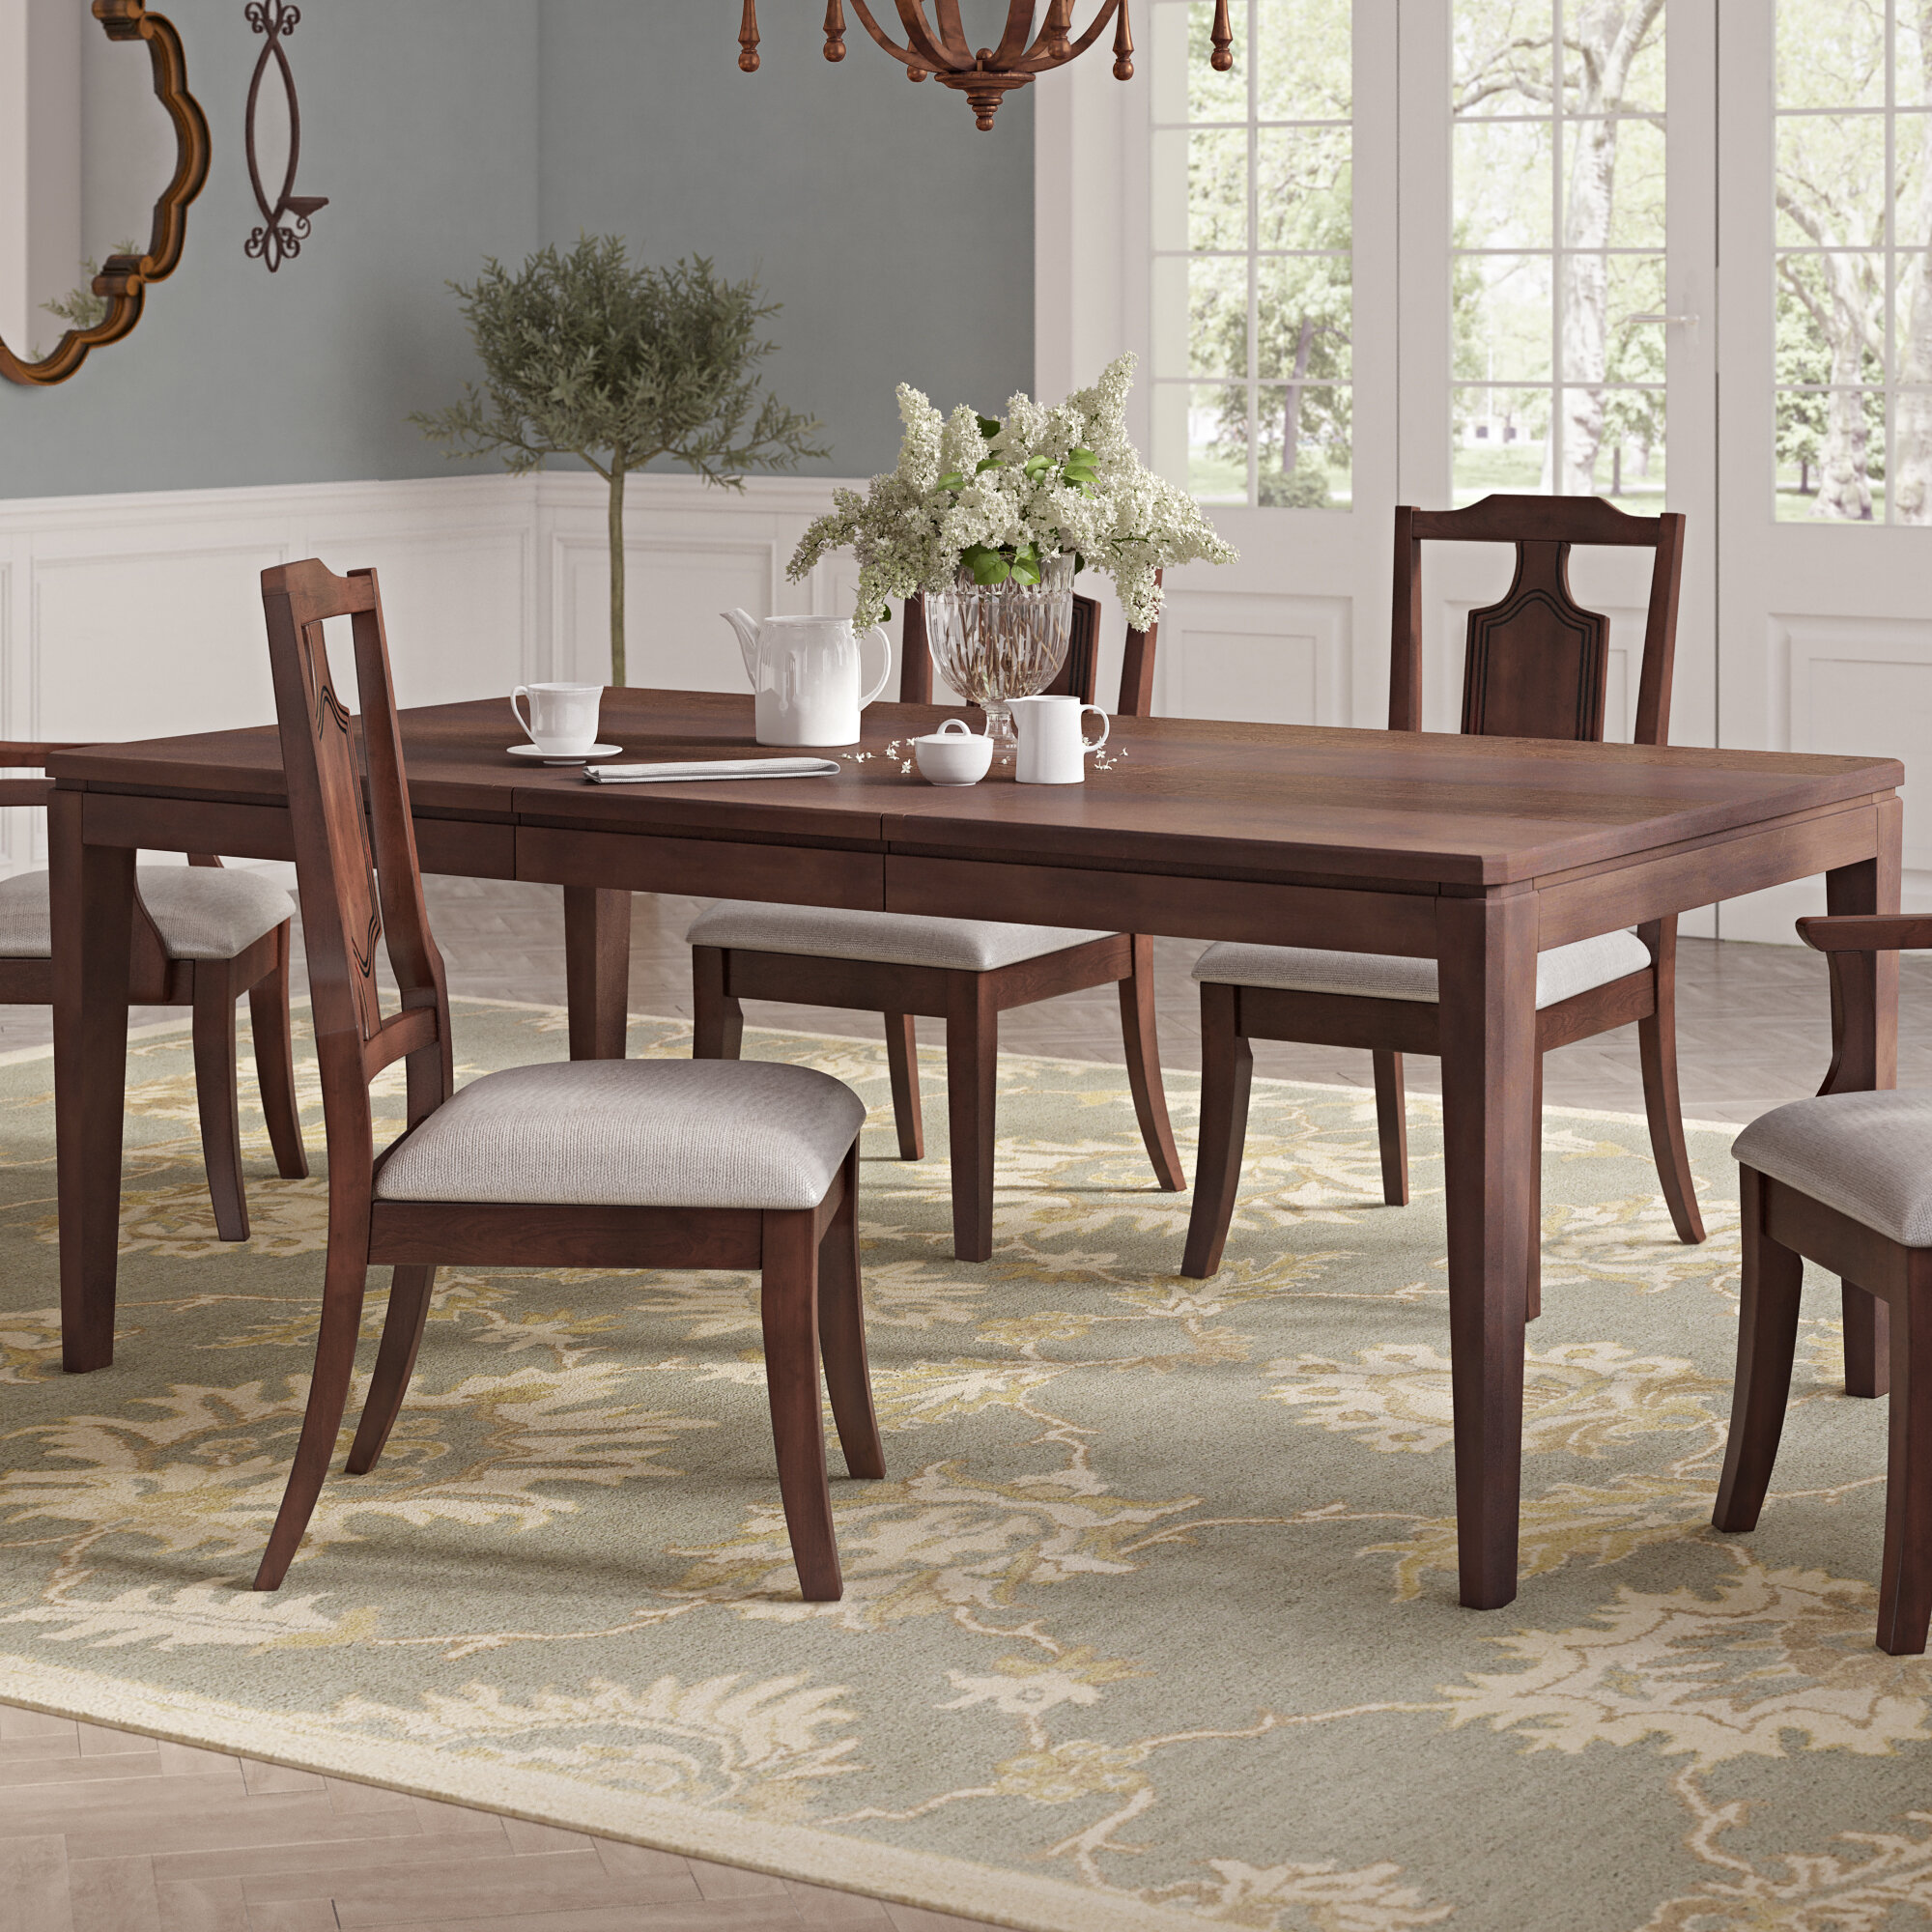 Darby Home Co Bales Extendable Solid Wood Dining Table Wayfair